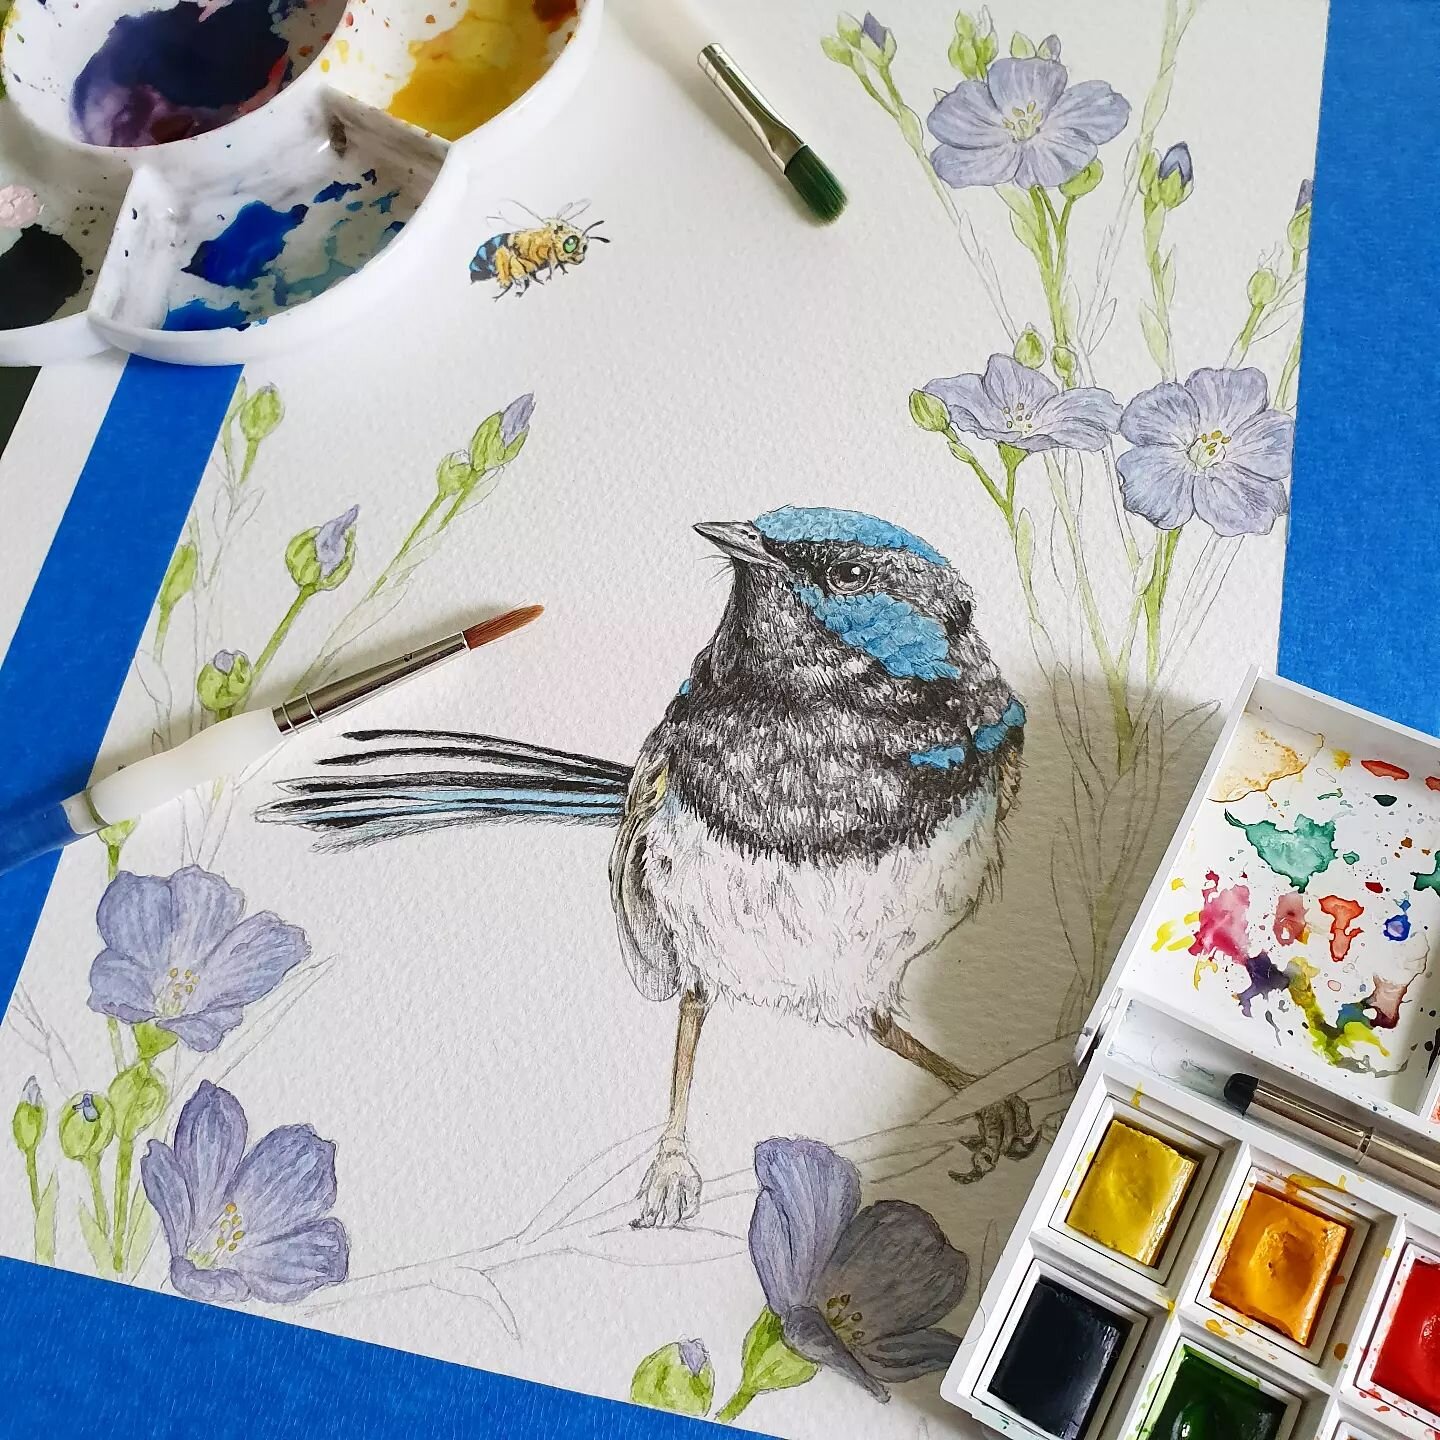 🔥 Feathers and Fur 🔥 Art exhibition is on this long weekend at Morpeth Art Gallery ! Sat 11th to Monday 13th June, 10am to 5pm, free entry 🔥  love to see you guys there and hope you enjoy the exhibition!

Here's the watercolour process of 'Blue Ha